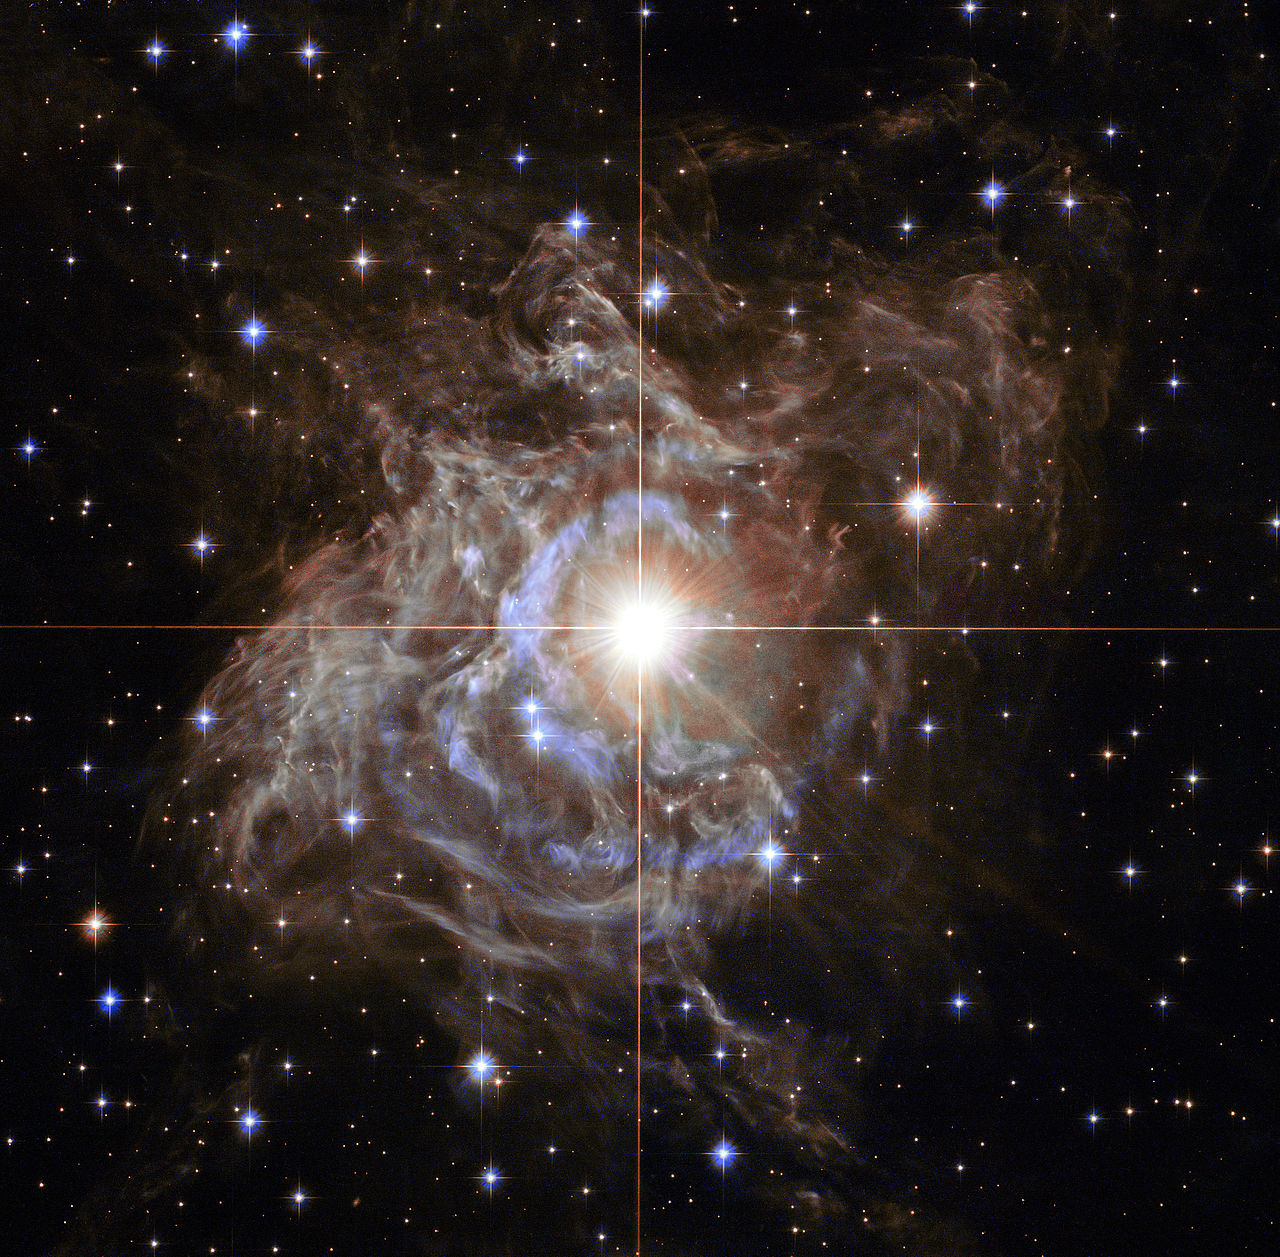 This Hubble image shows RS Puppis, a type of variable star known as a Cepheid variable. As variable stars go, Cepheids have comparatively long periods— RS Puppis, for example, varies in brightness by almost a factor of five every 40 or so days. RS Puppis is unusual; this variable star is shrouded by thick, dark clouds of dust enabling a phenomenon known as a light echo to be shown with stunning clarity. These Hubble observations show the ethereal object embedded in its dusty environment, set against a dark sky filled with background galaxies.